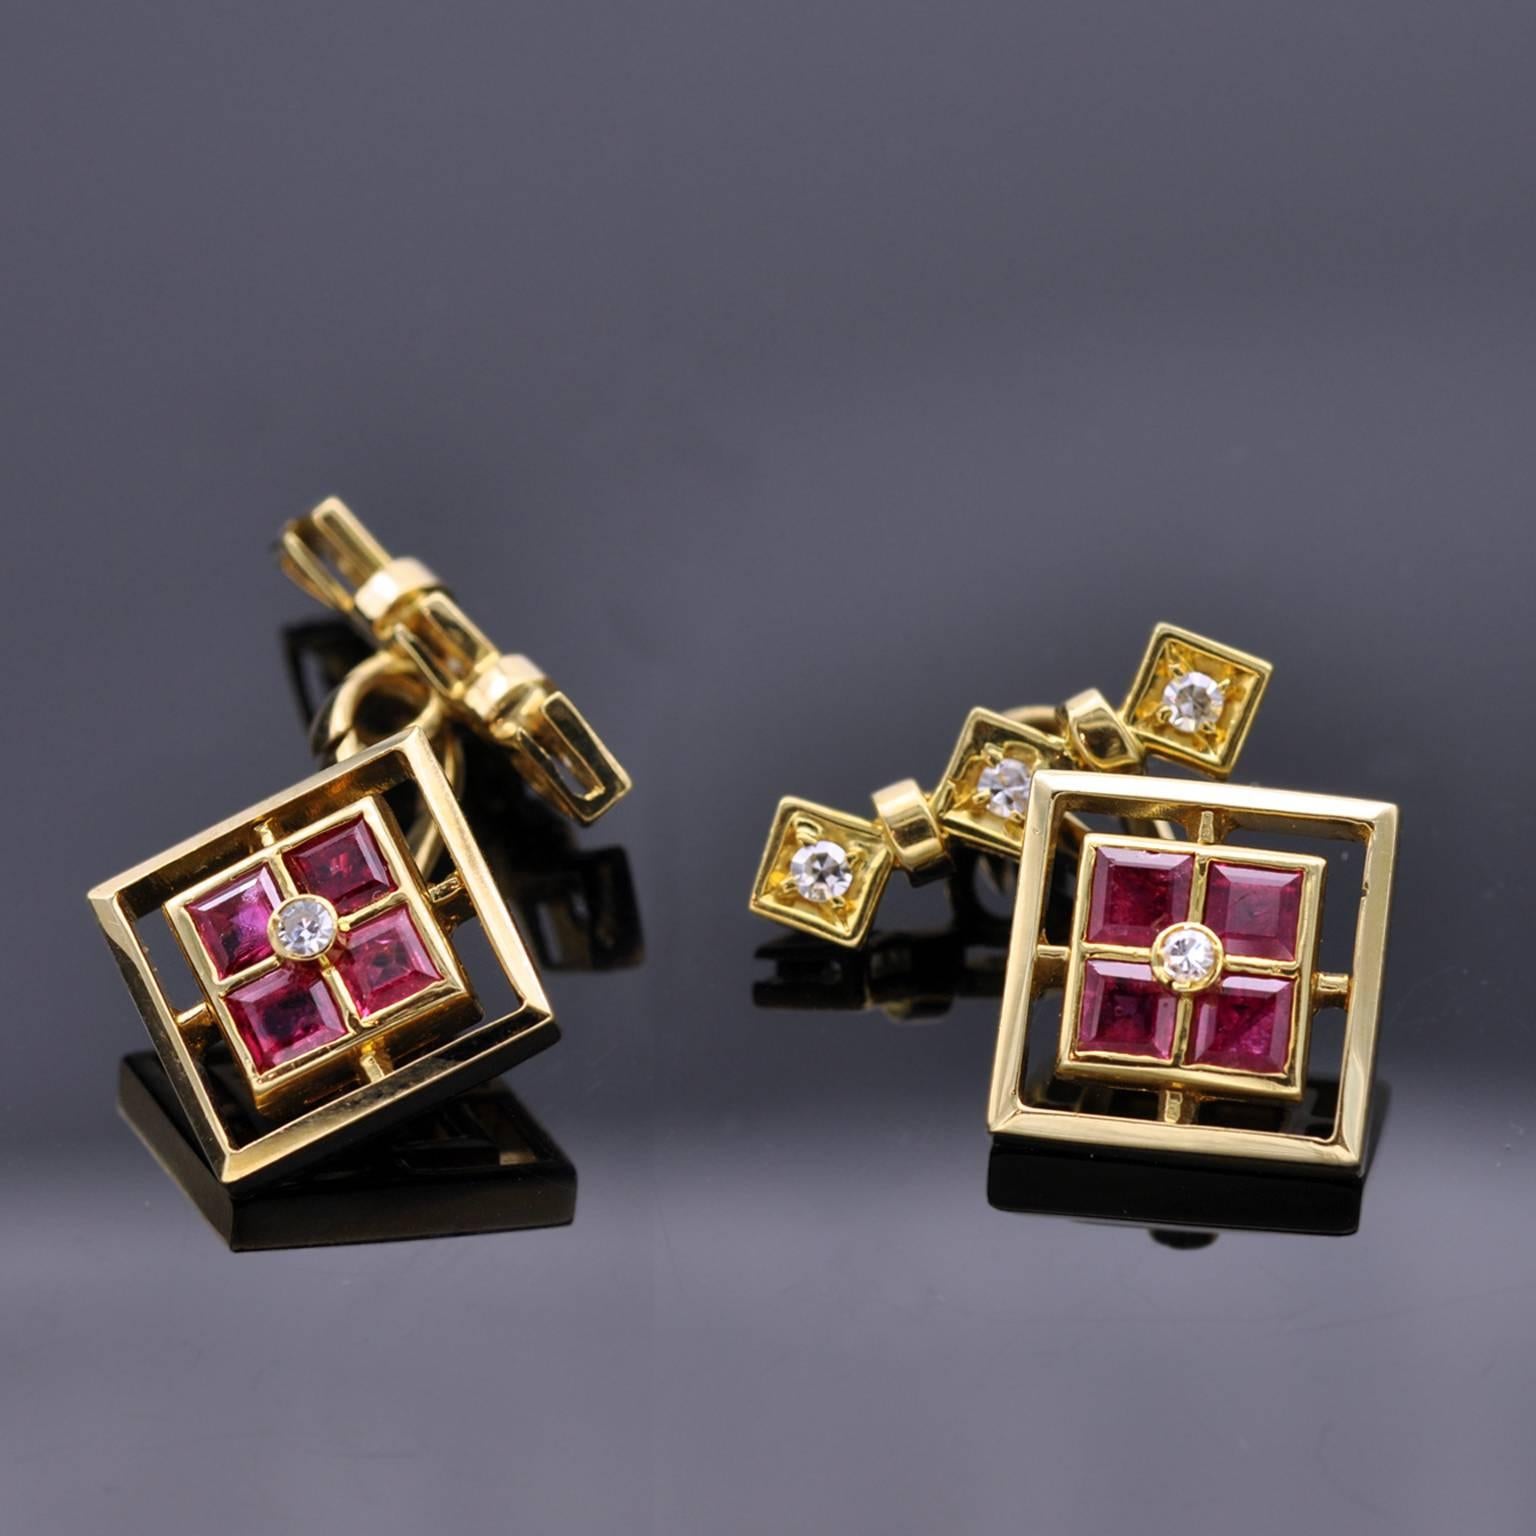 Four square rubies with a diamond nested in their midst in a square classy design. On the back to hold the cufflink in place three diamonds are set in three squares. excellent work. 
french hallmark